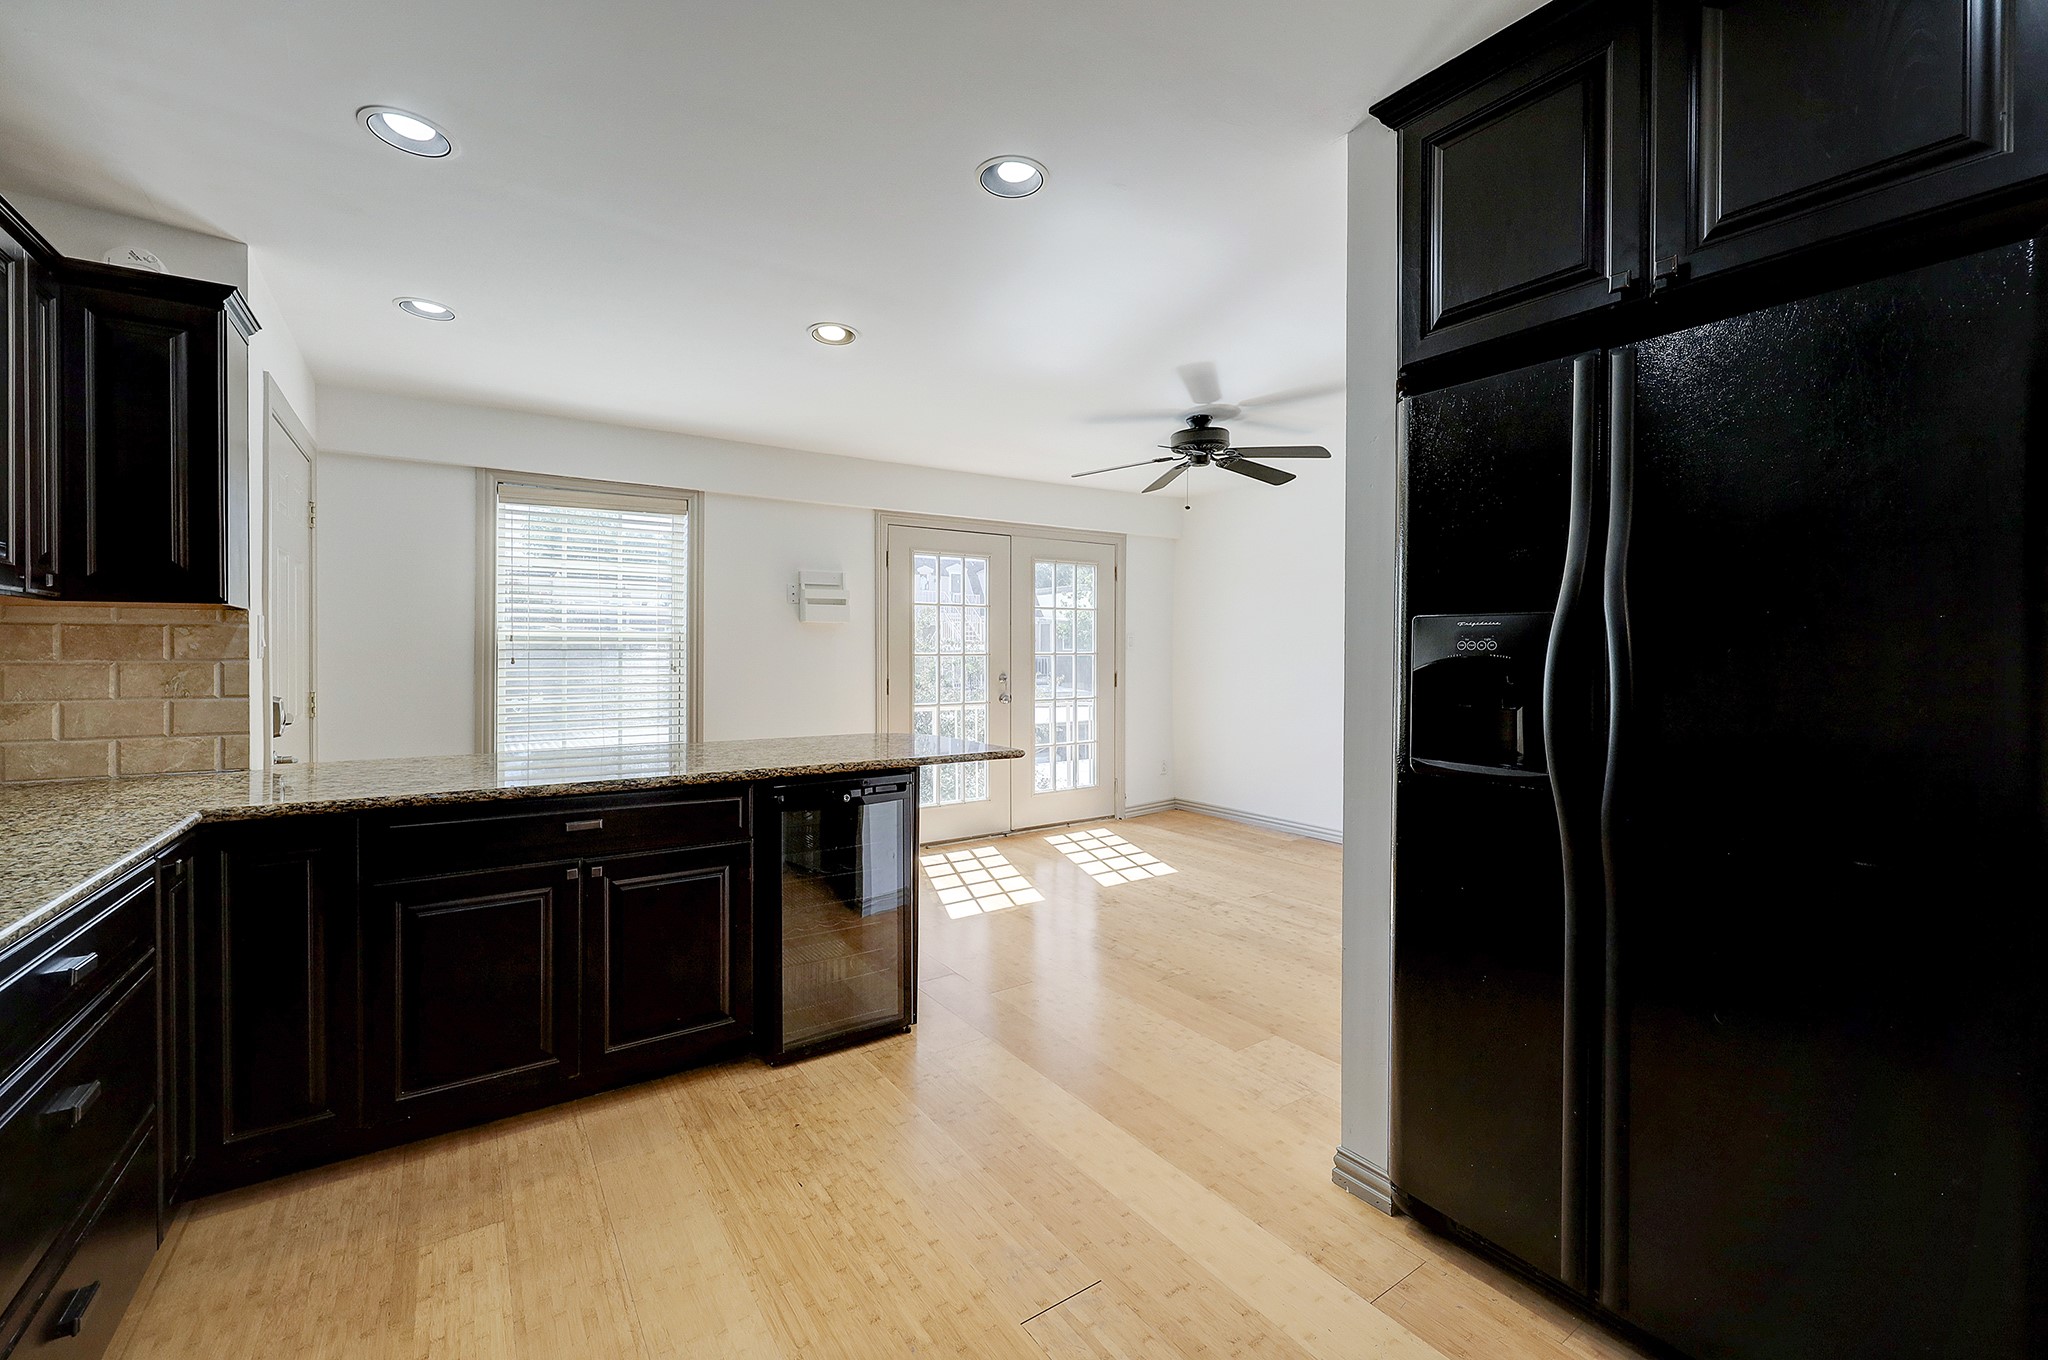 Alternate view of the chef's space. A large breakfast bar offers a perfect place for a casual meal. A wine cooler is conveyed in the sale of the home.